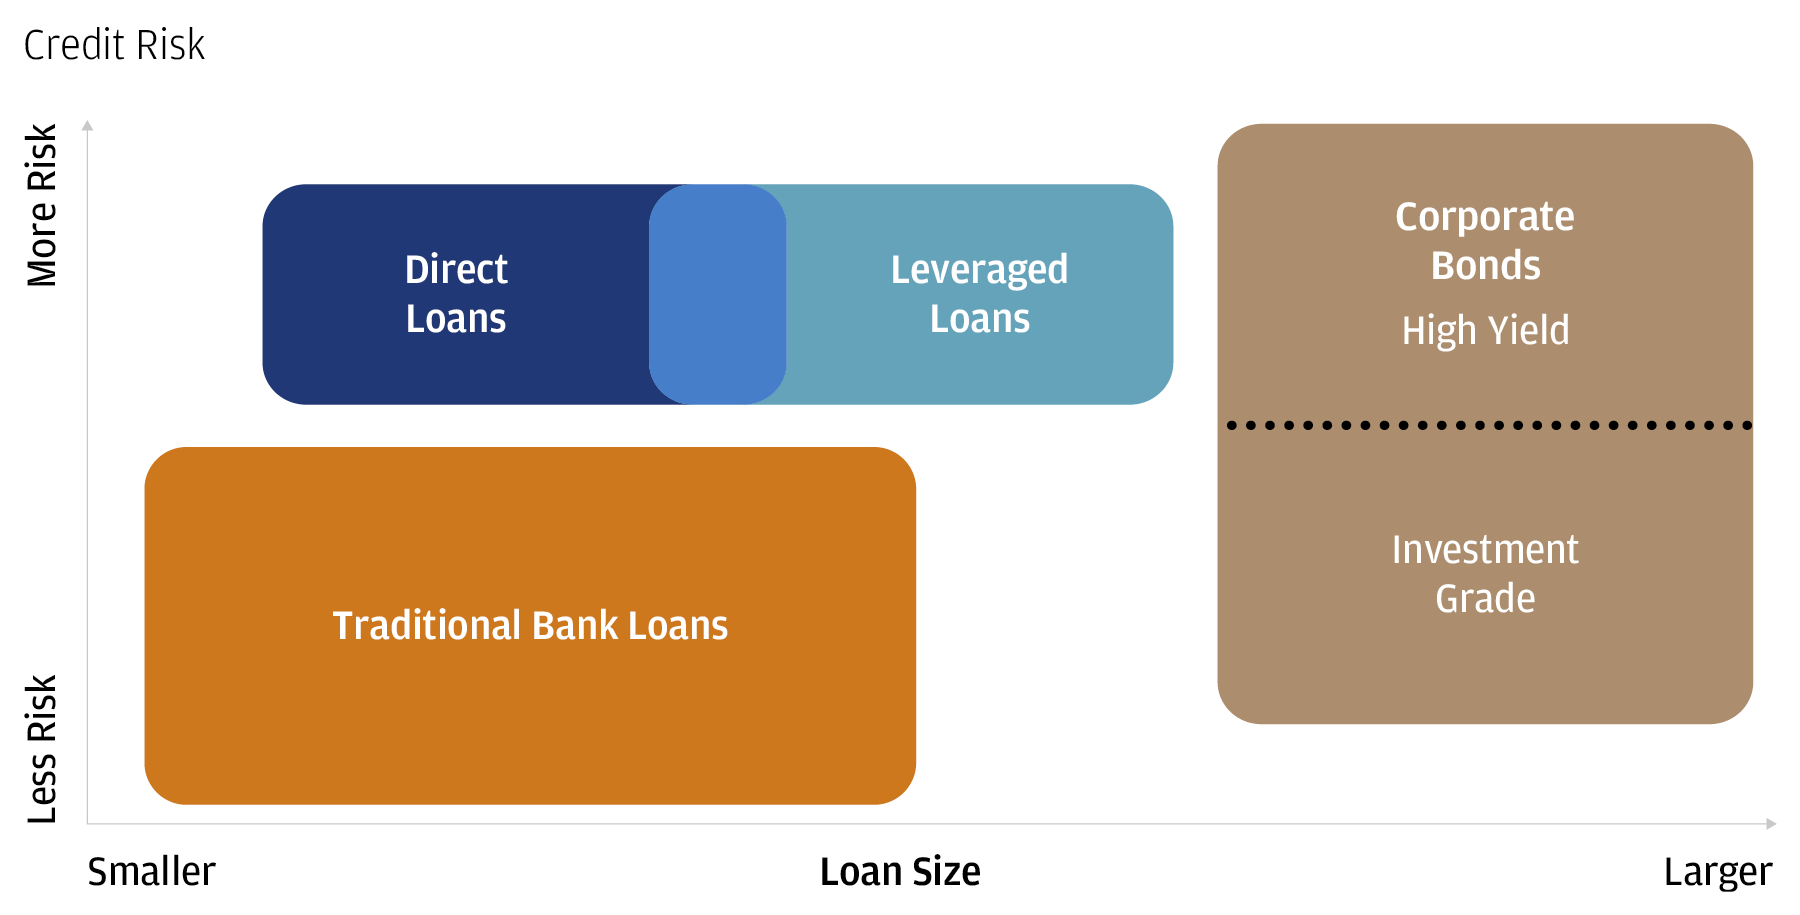 This chart shows corporate lending sources along credit risk in the y-axis and loan size in the x-axis